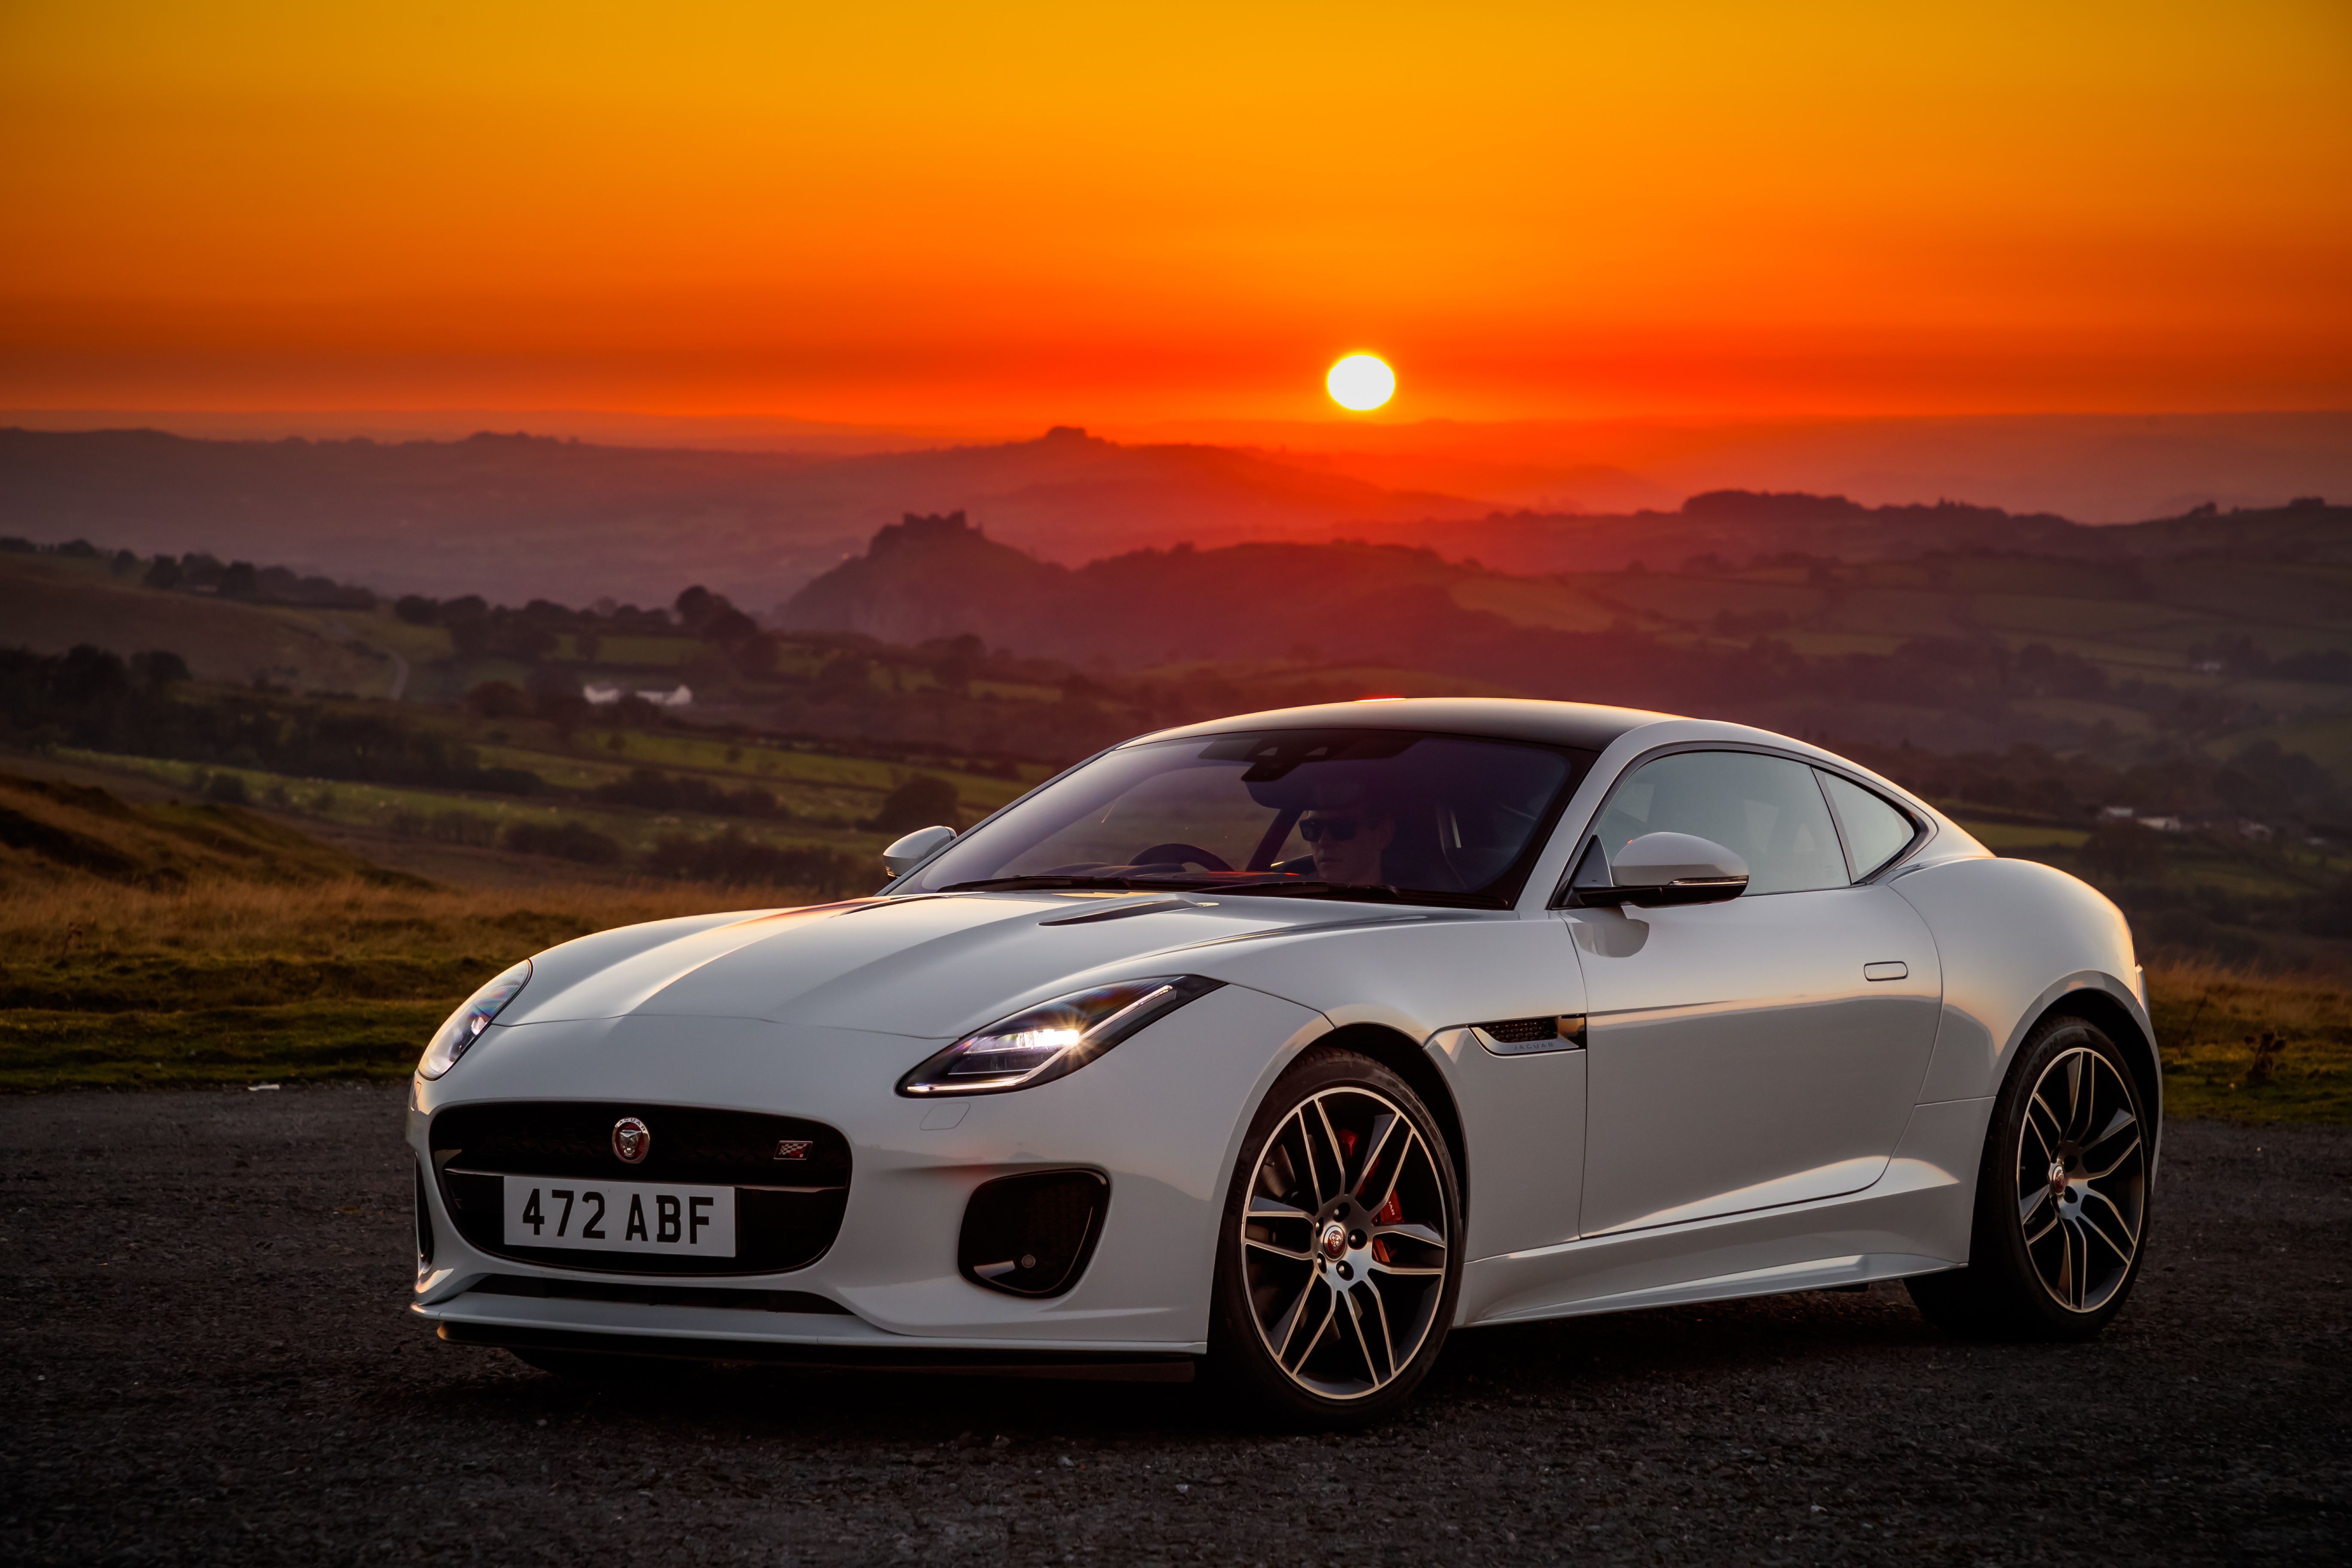 2019 Jaguar F-TYPE Checkered Flag Limited Edition Coupe